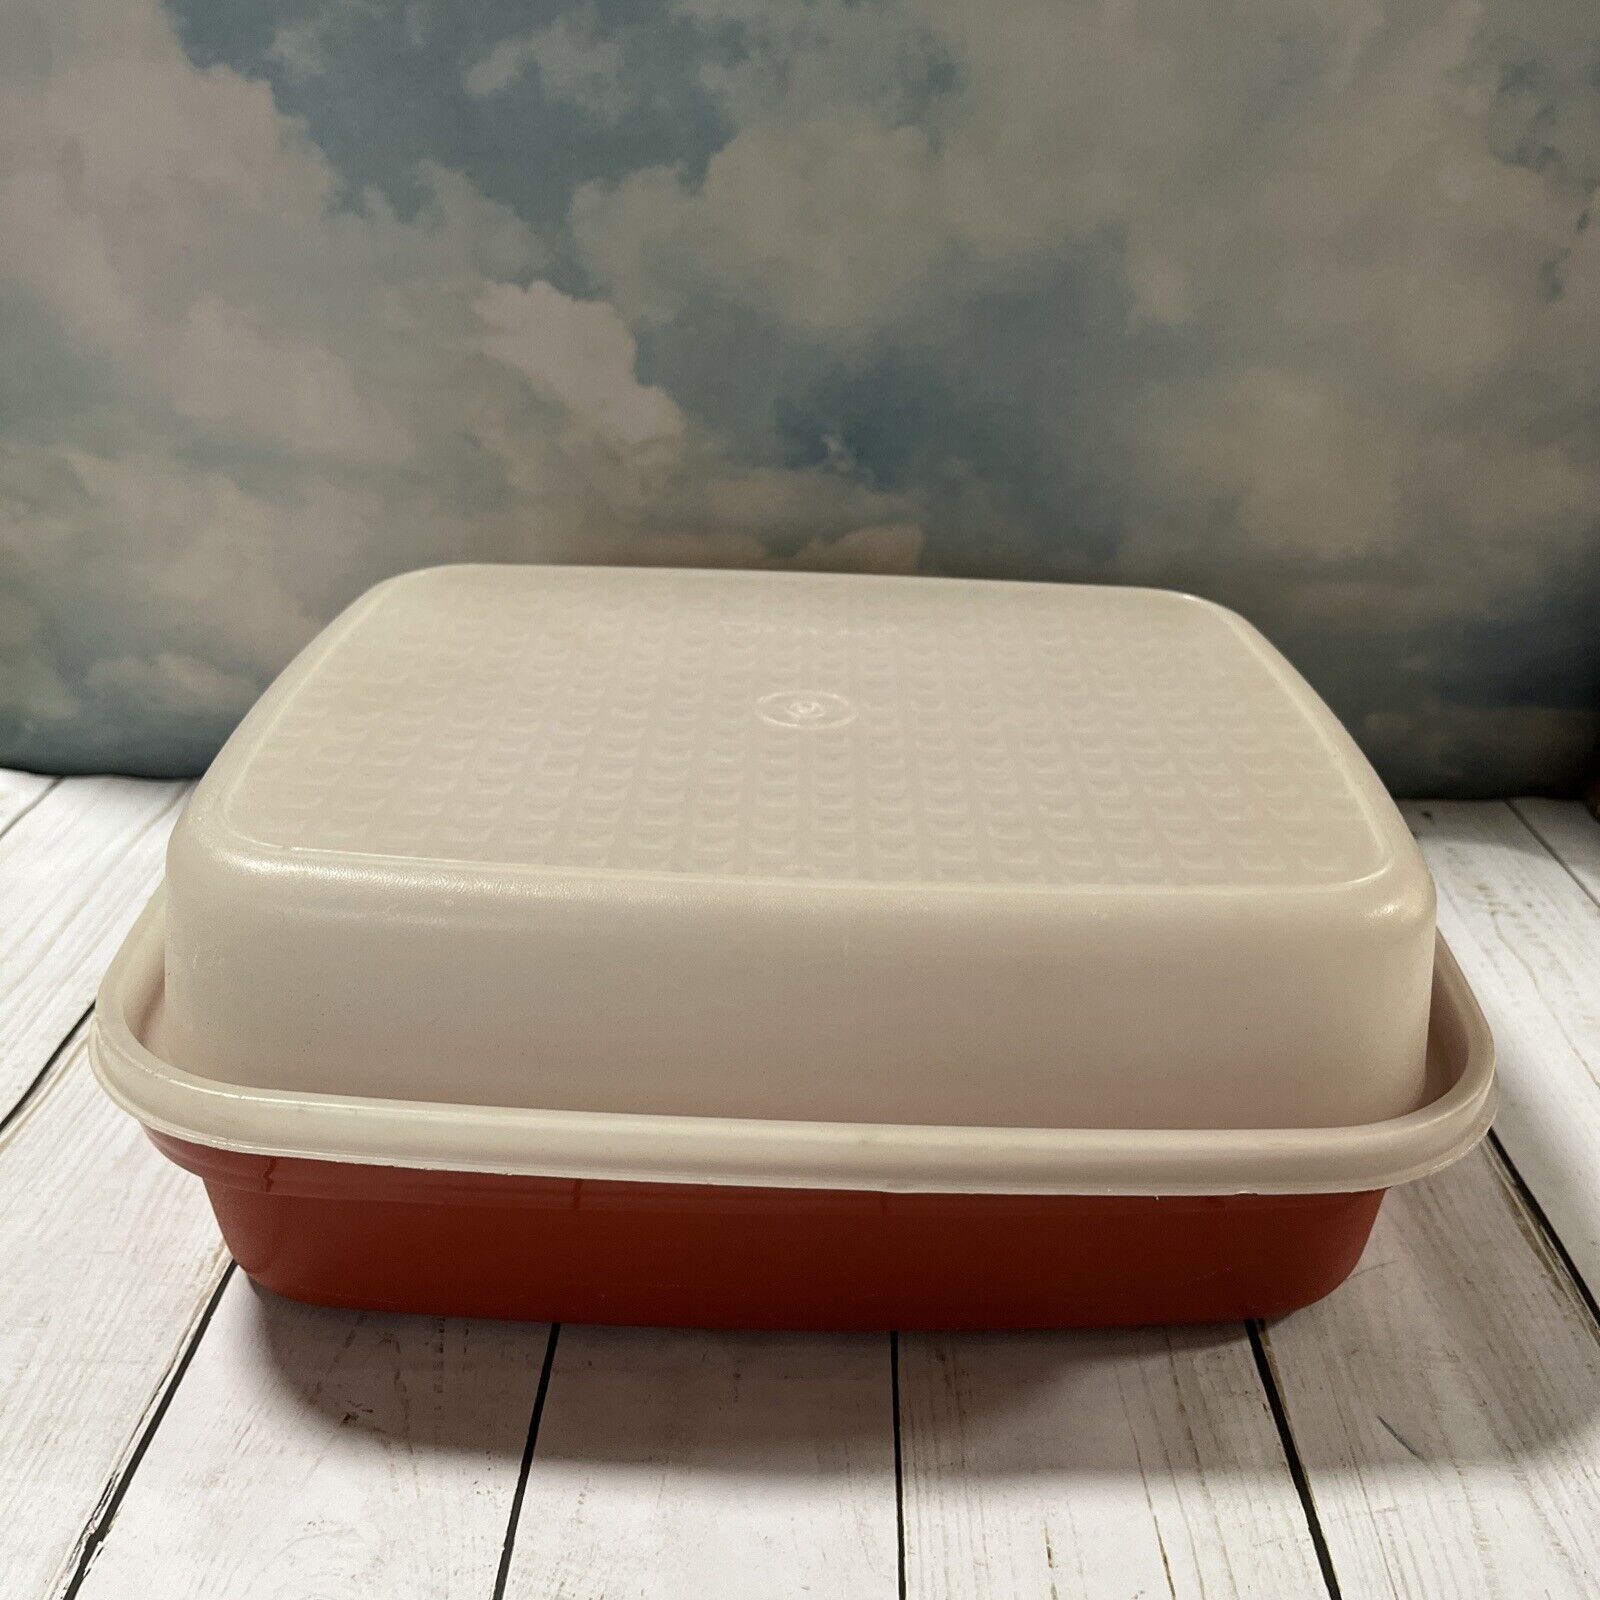 VTG Tupperware Season N Serve Large Meat Marinade Container Paprika Red 1294